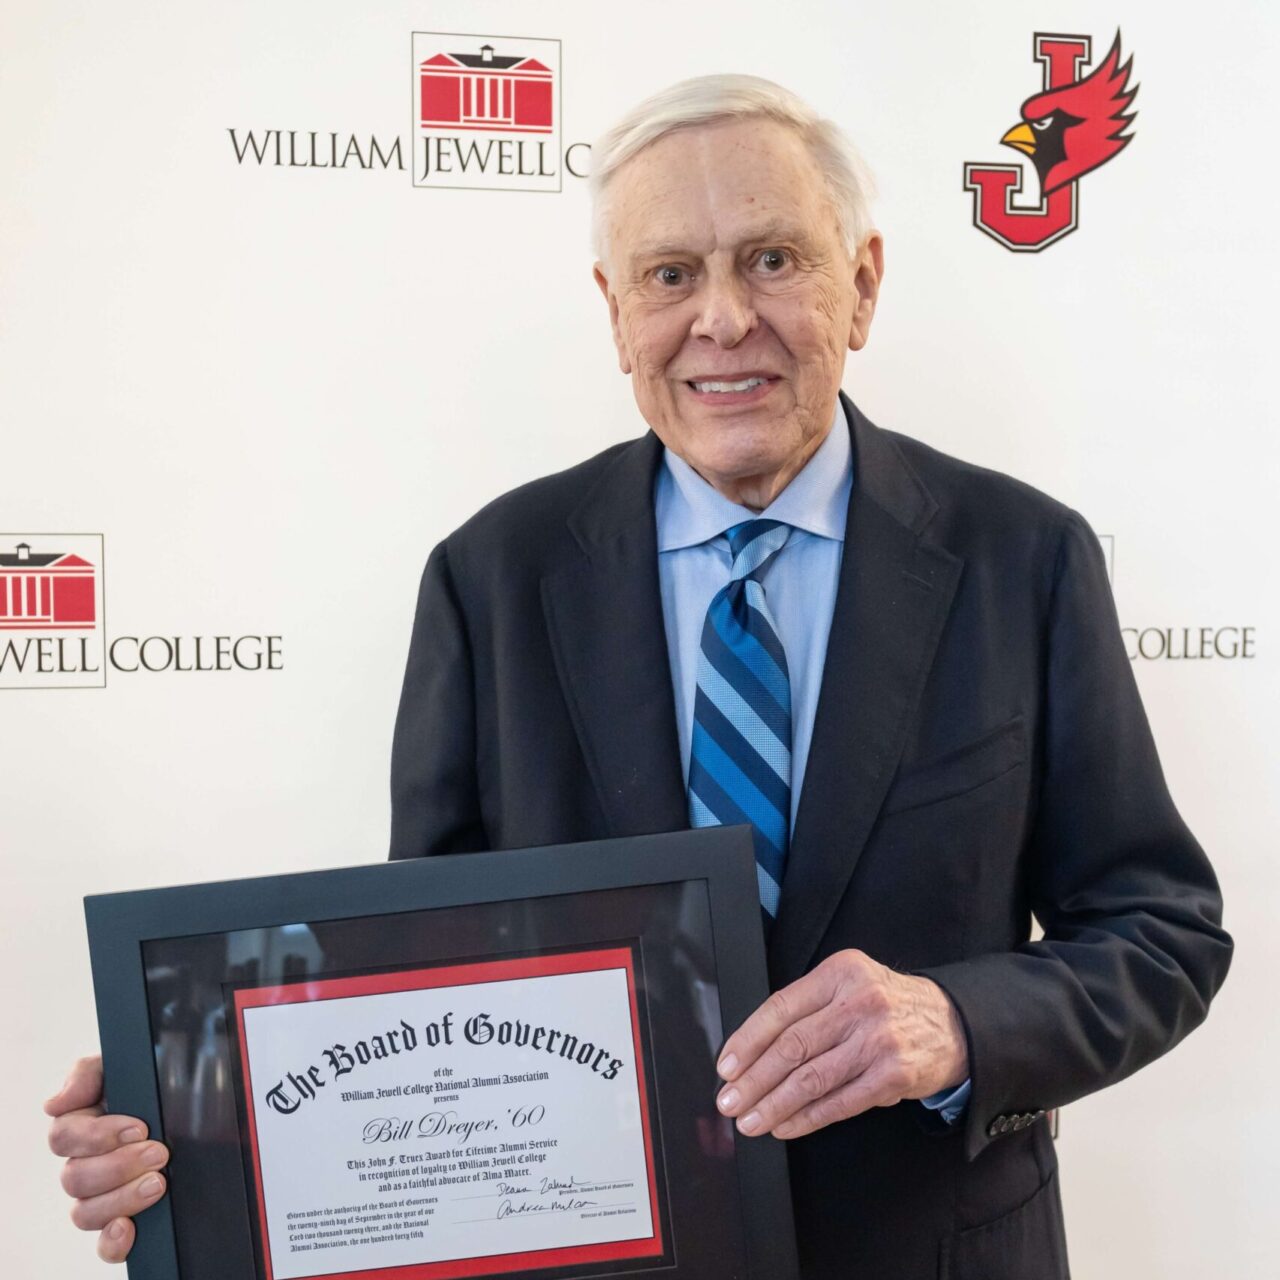 Bill Dreyer at William Jewell Event with Award